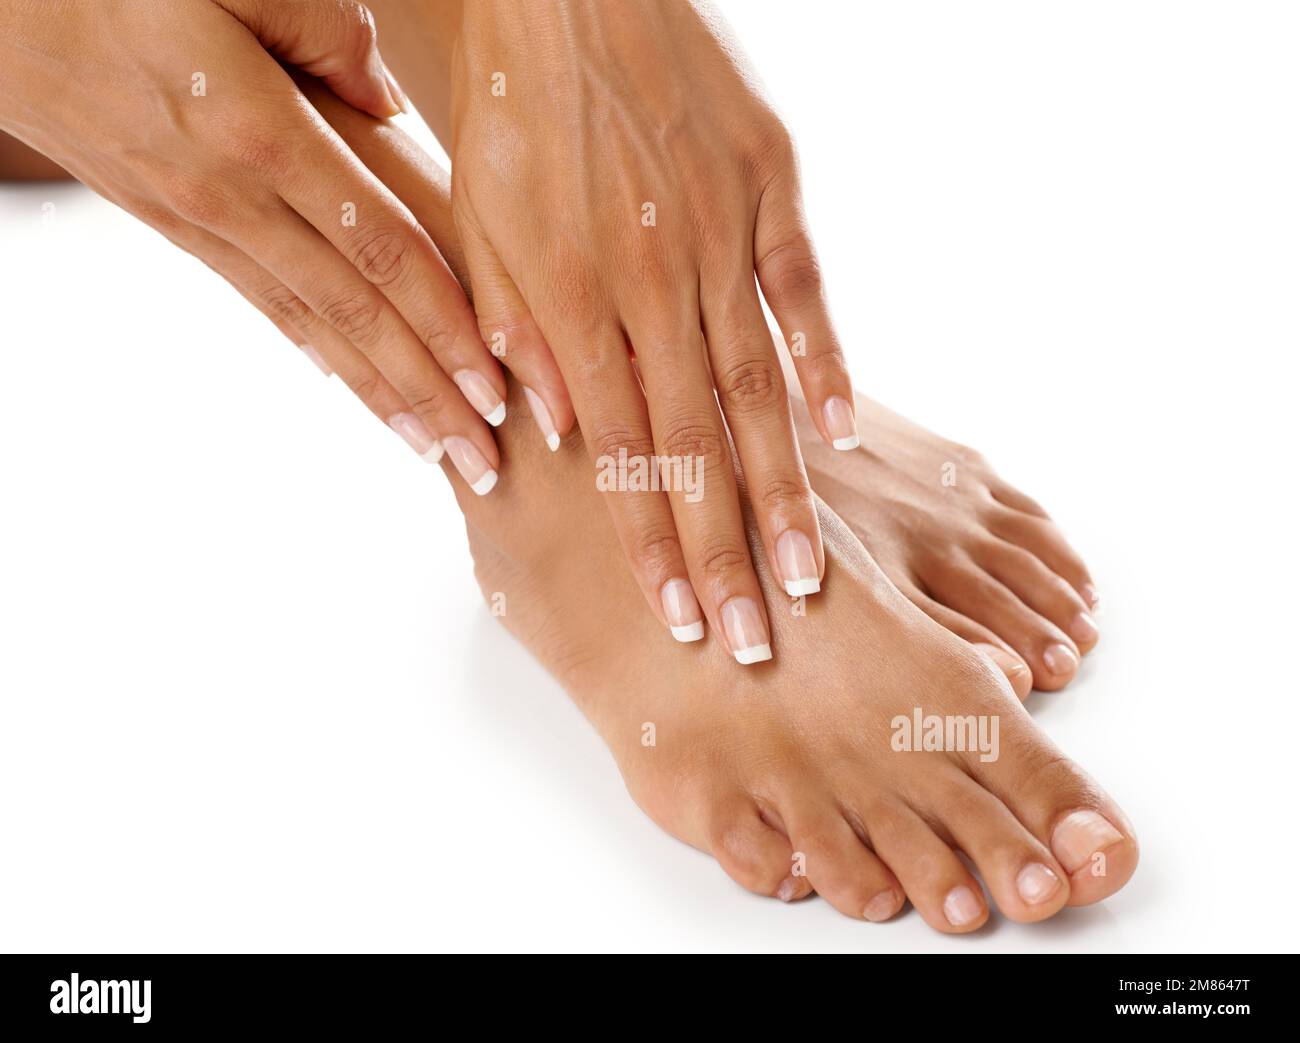 https://c8.alamy.com/comp/2M8647T/woman-hands-and-feet-with-beauty-and-skincare-manicure-and-pedicure-spa-treatment-zoom-with-nails-natural-cosmetics-organic-cosmetic-care-and-2M8647T.jpg